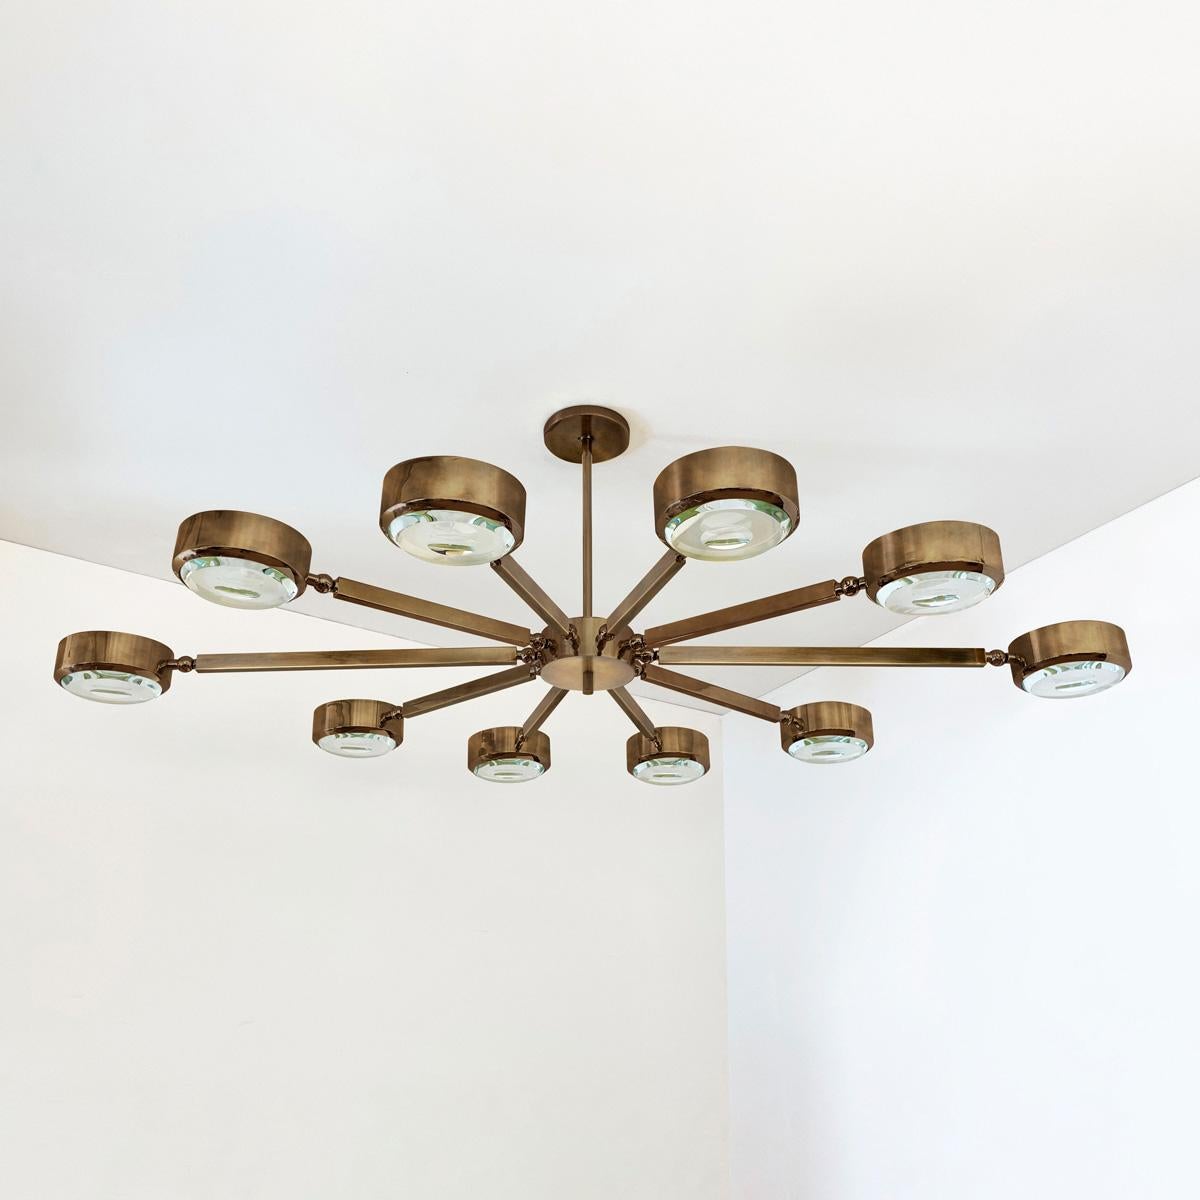 Modern Oculus Oval Ceiling Light by Gaspare Asaro- Polished Nickel with Carved Glass For Sale